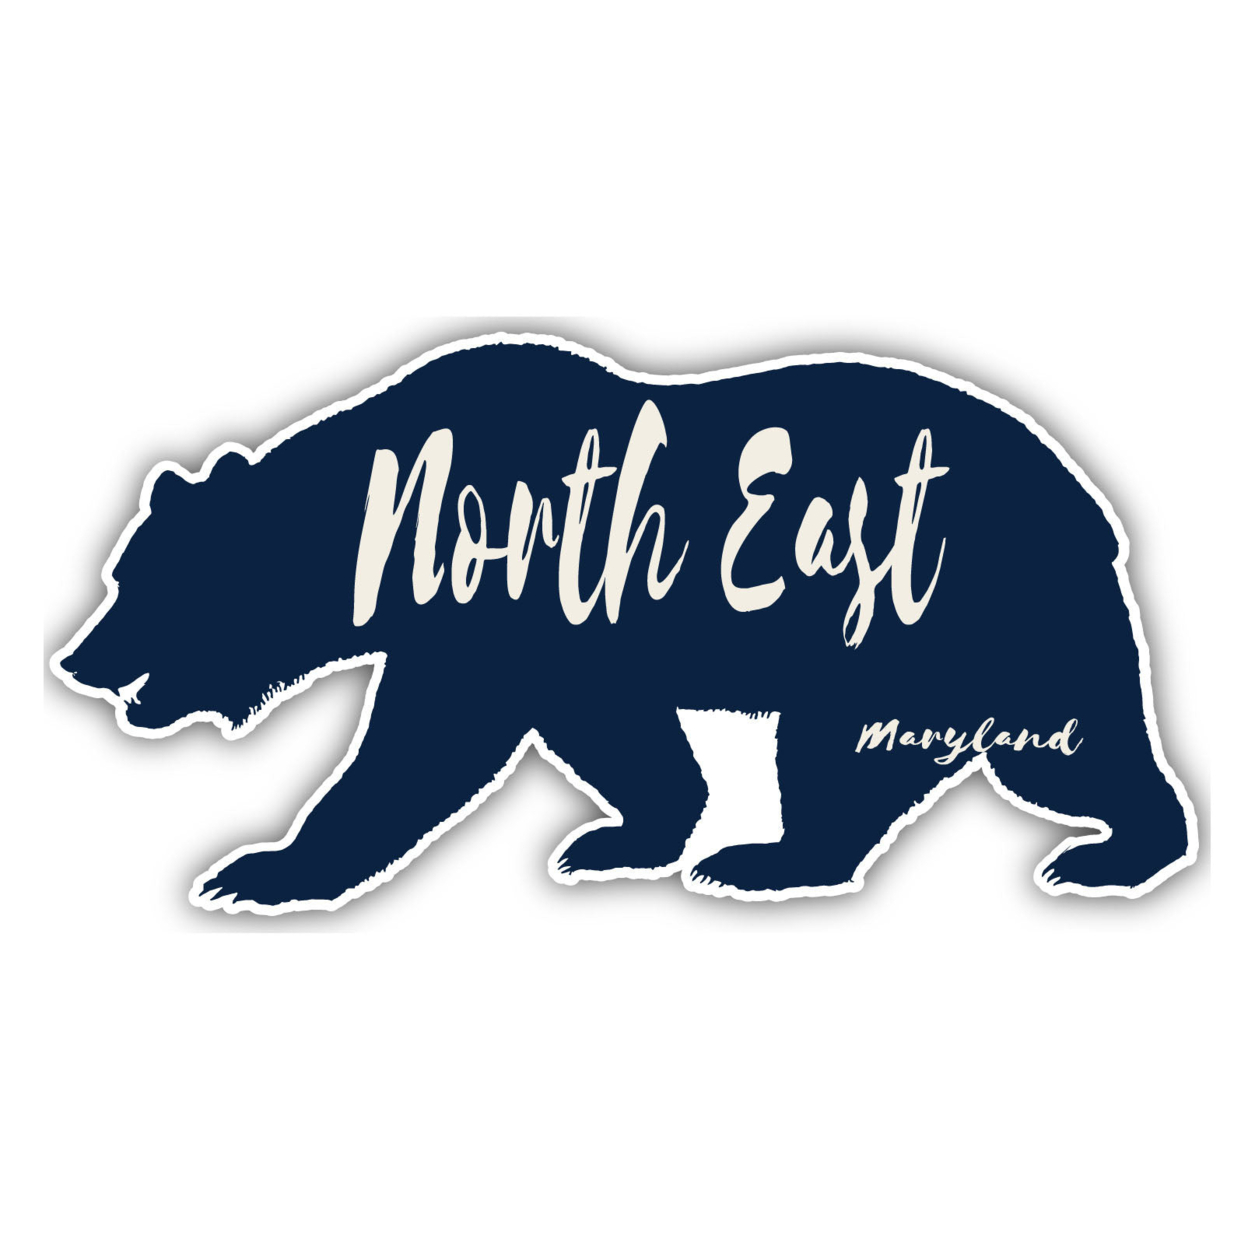 North East Maryland Souvenir Decorative Stickers (Choose Theme And Size) - Single Unit, 2-Inch, Bear